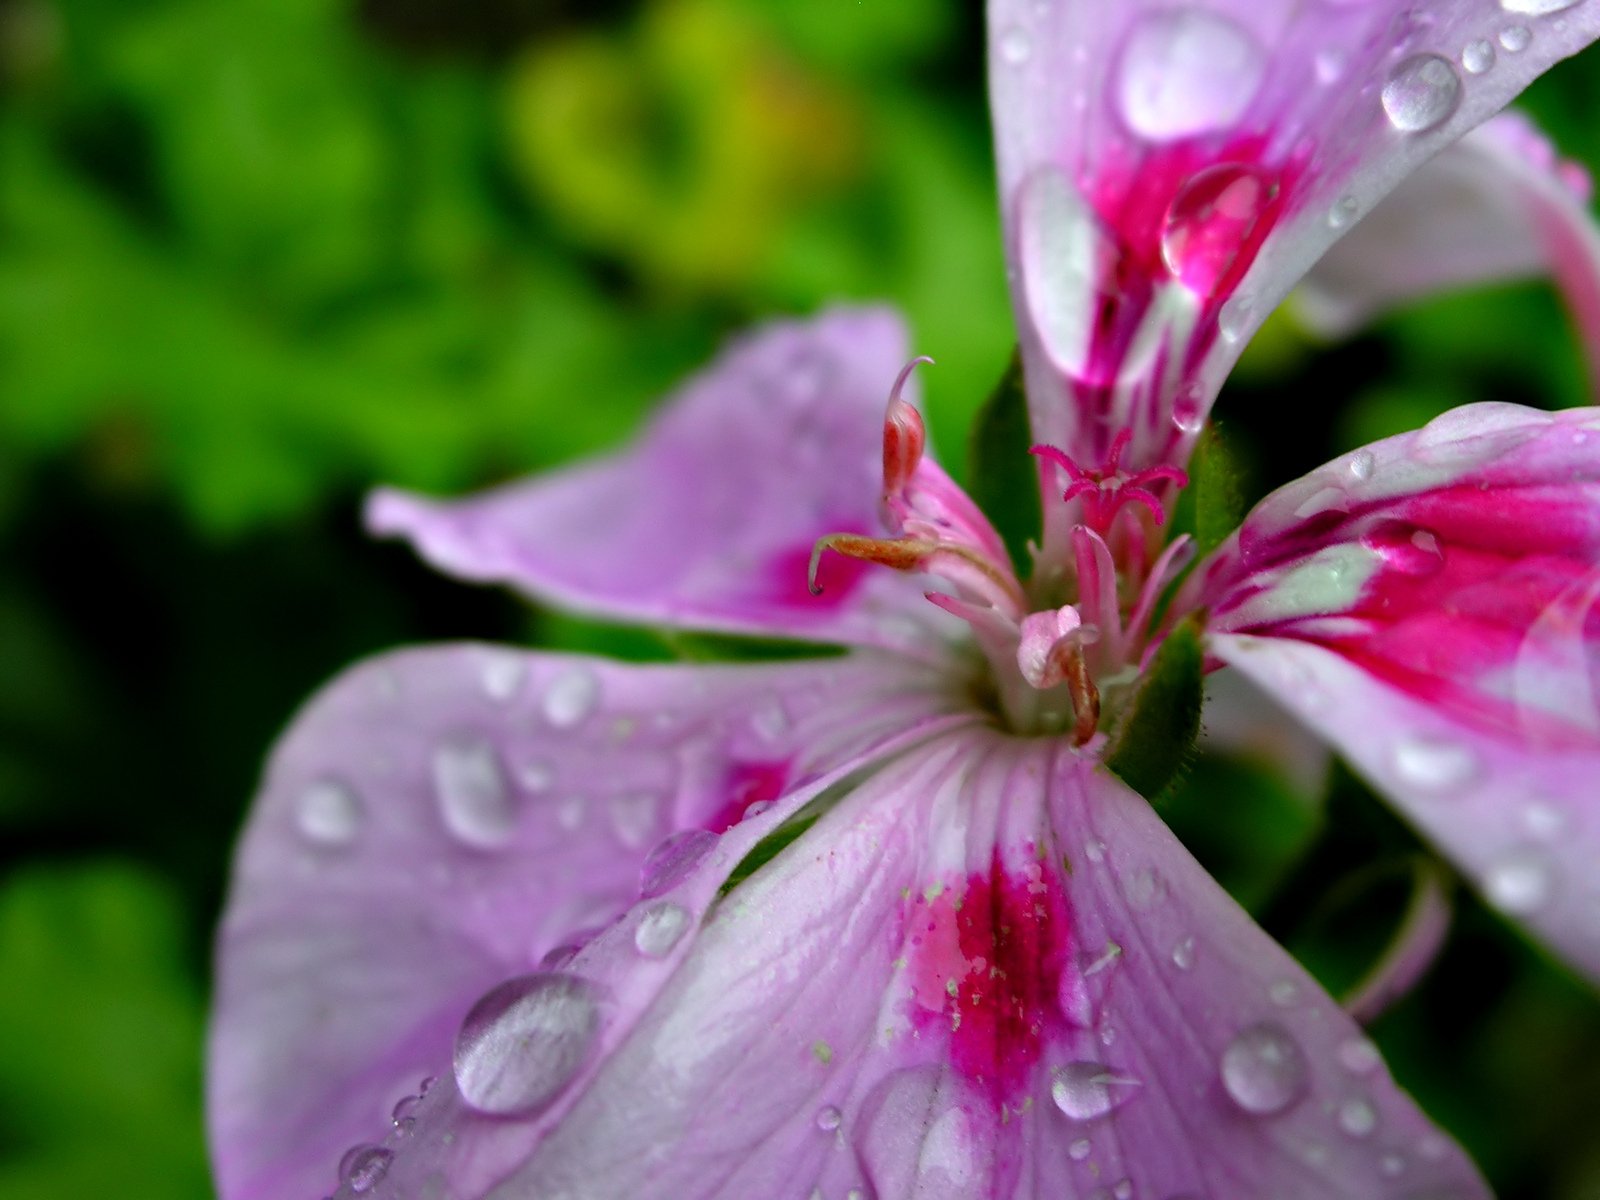 the water drops on the pink and white flower